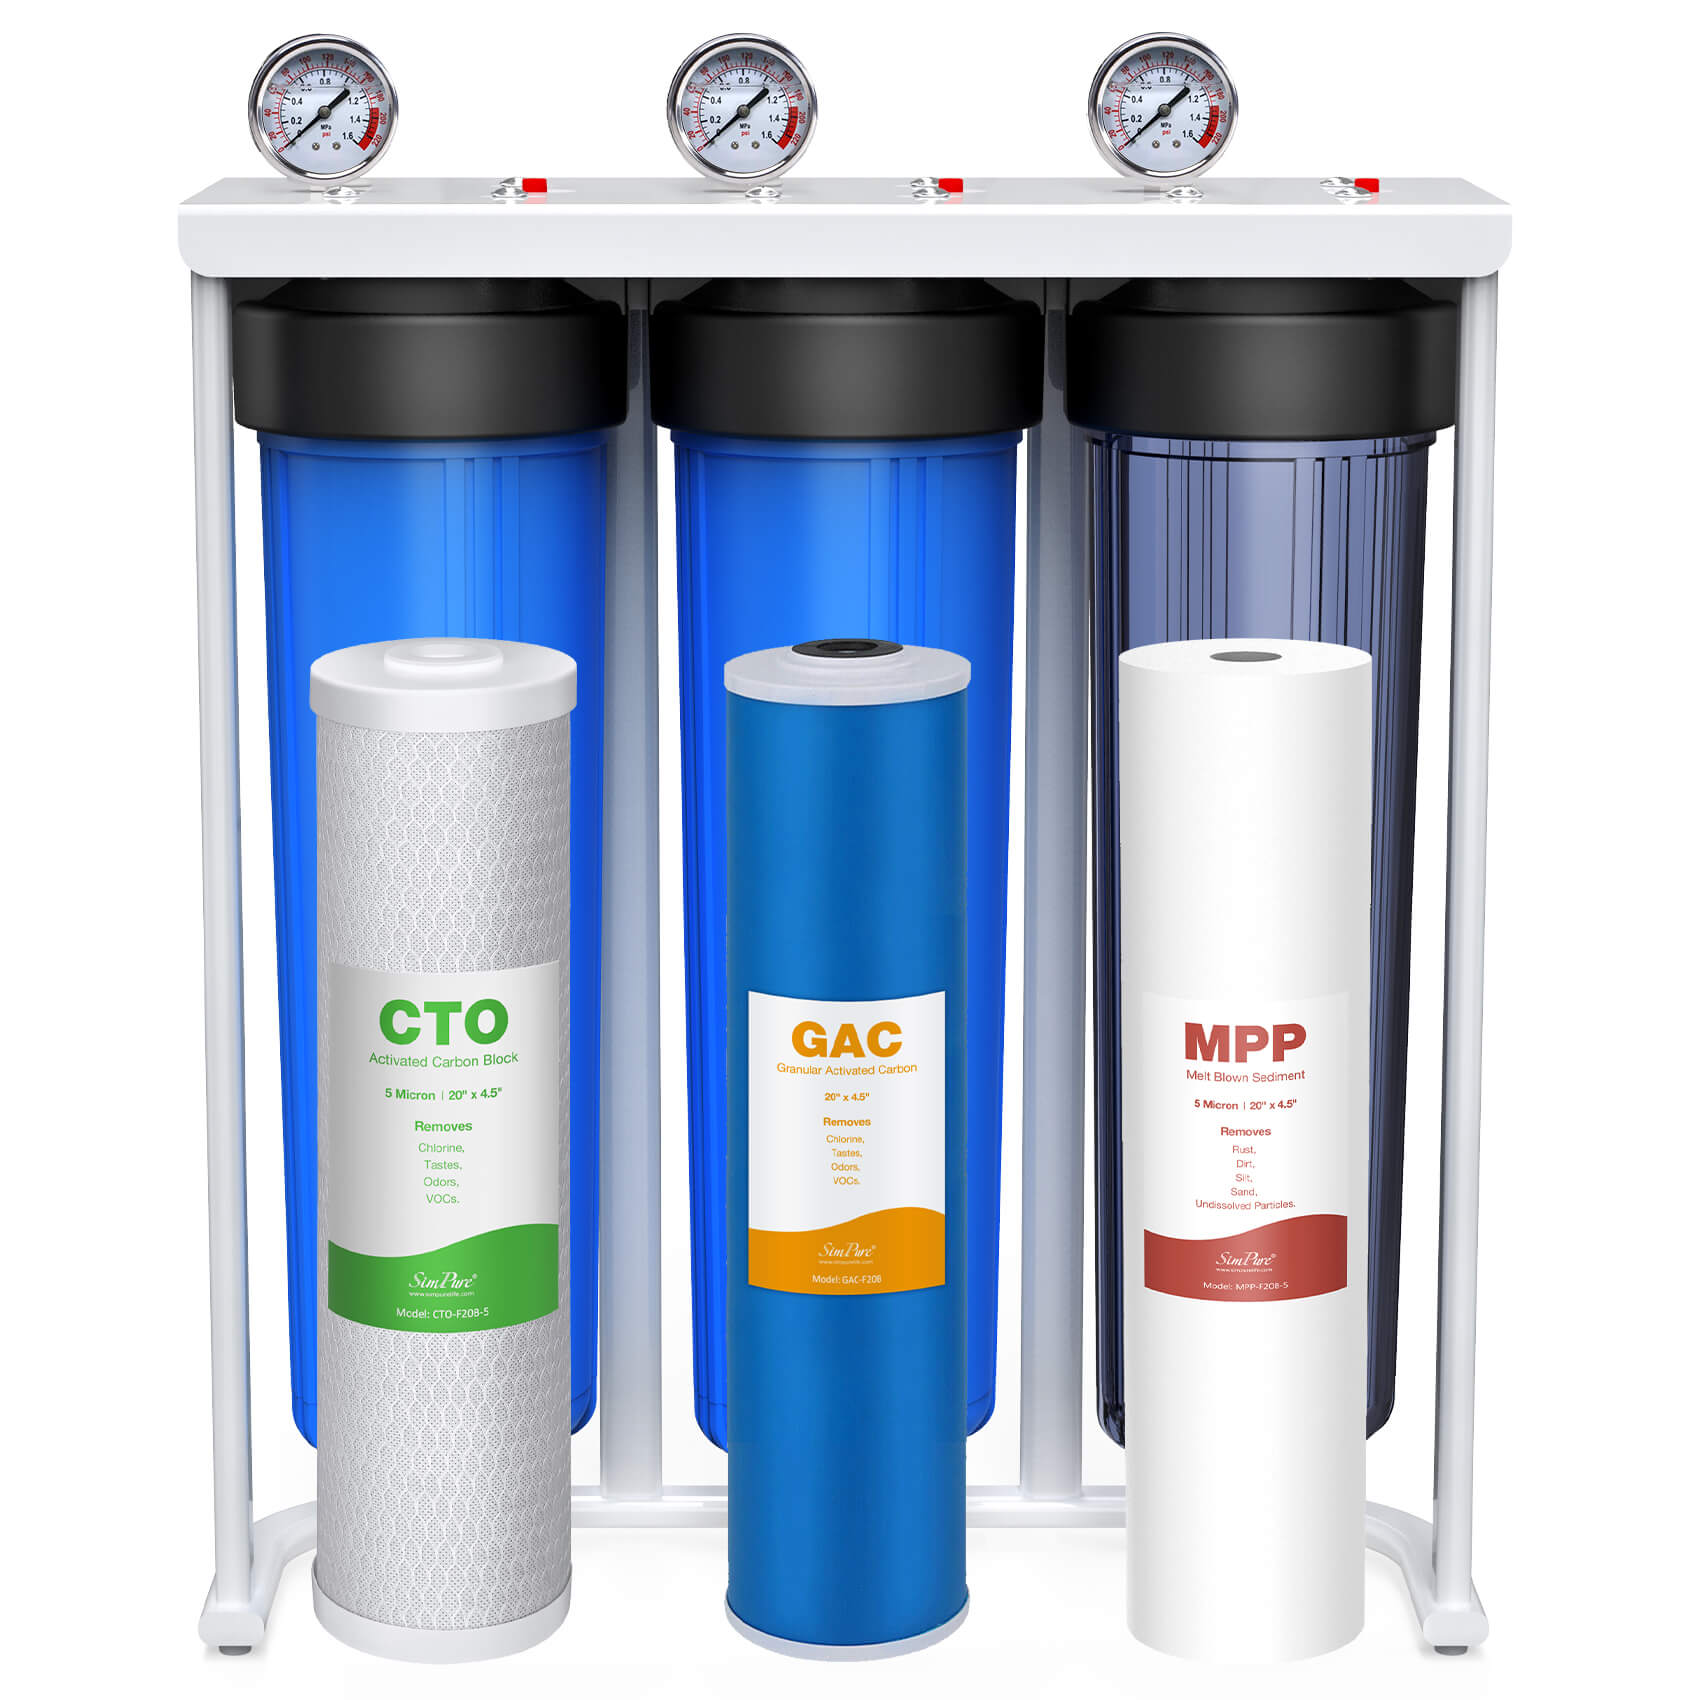 EXPRT MR-3030 Whole House Water Filter 3 Stage Water Purifier, GAC